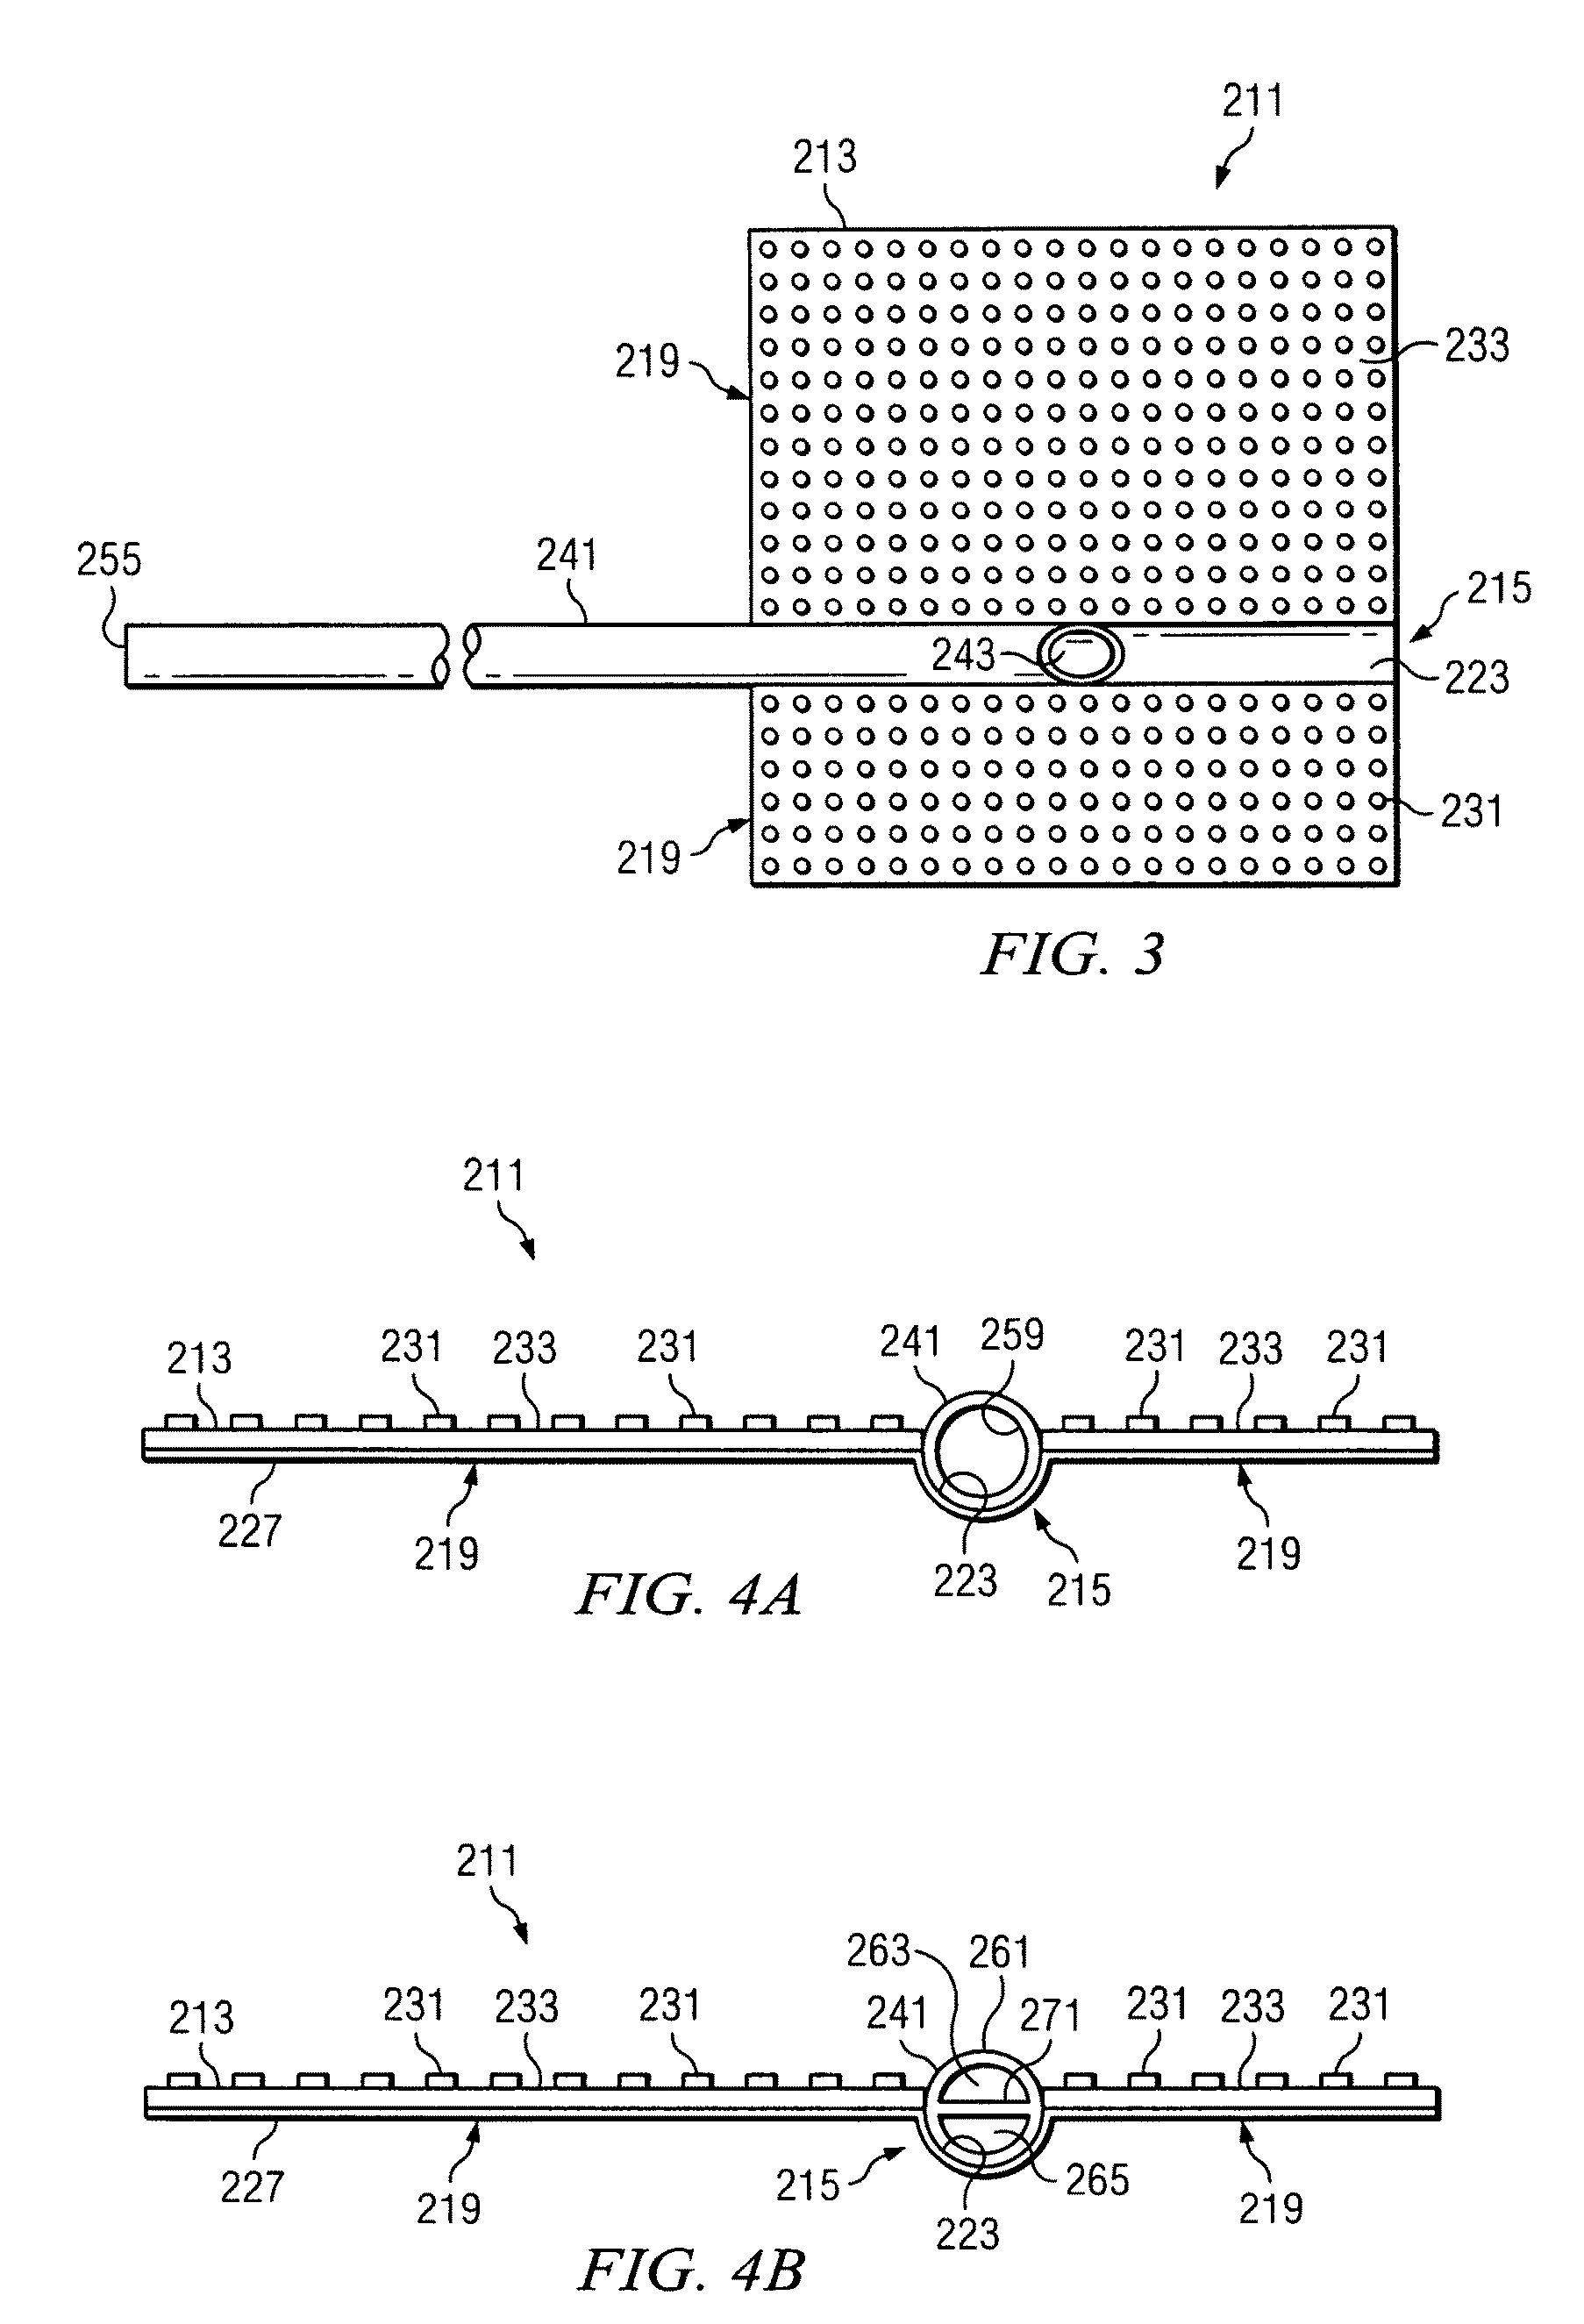 System for percutaneously administering reduced pressure treatment using balloon dissection